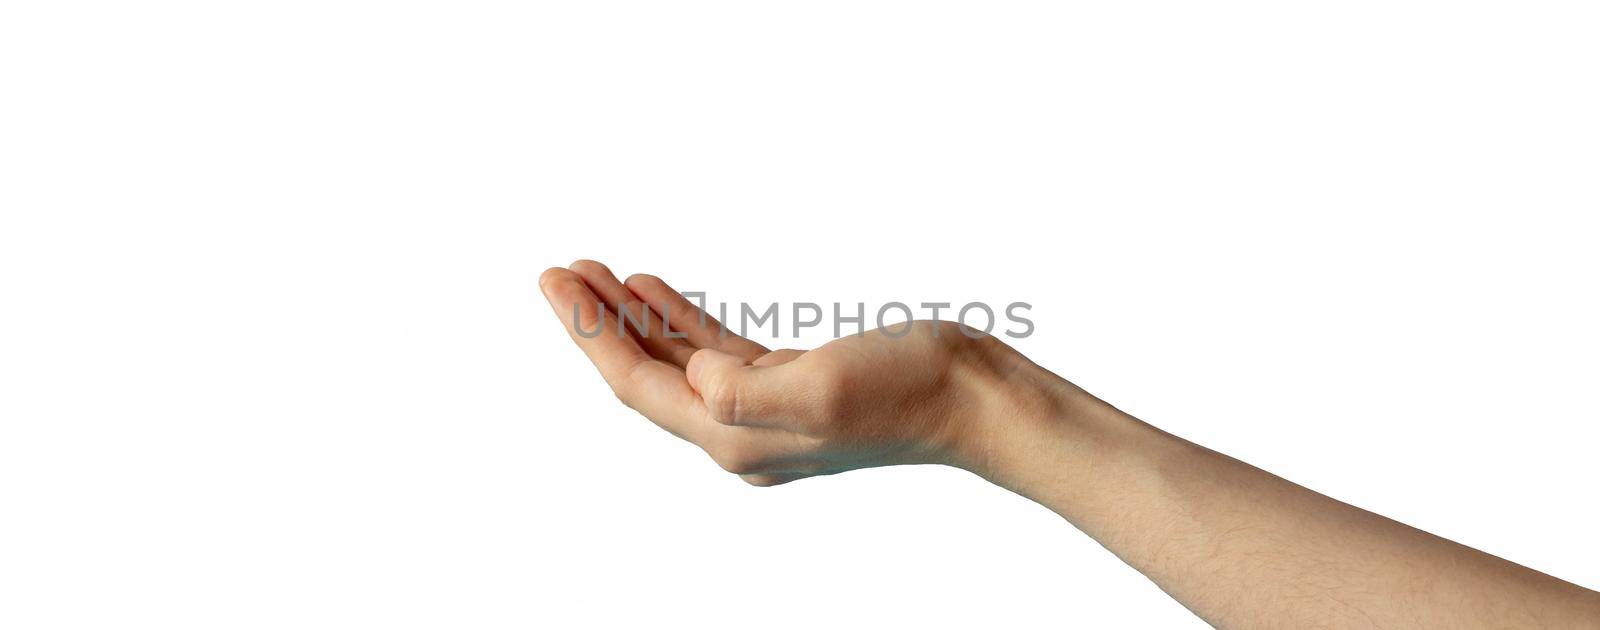 A hand extended palm up.The hand is open and ready to help or accept. A gesture highlighted on a white background with a clipping outline.